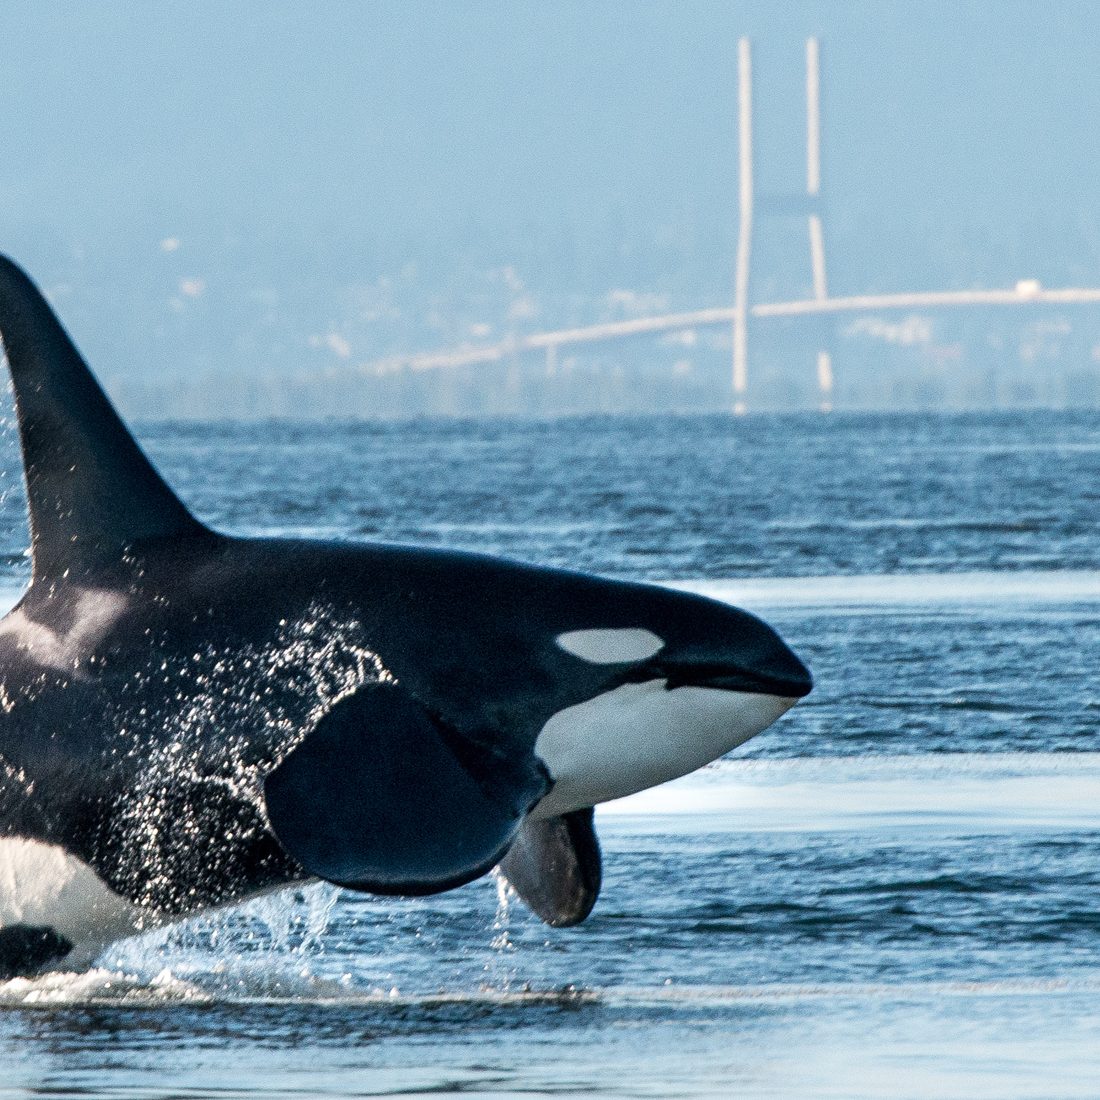 A large male orca (killer whale) breaches in Vancouver Harbor